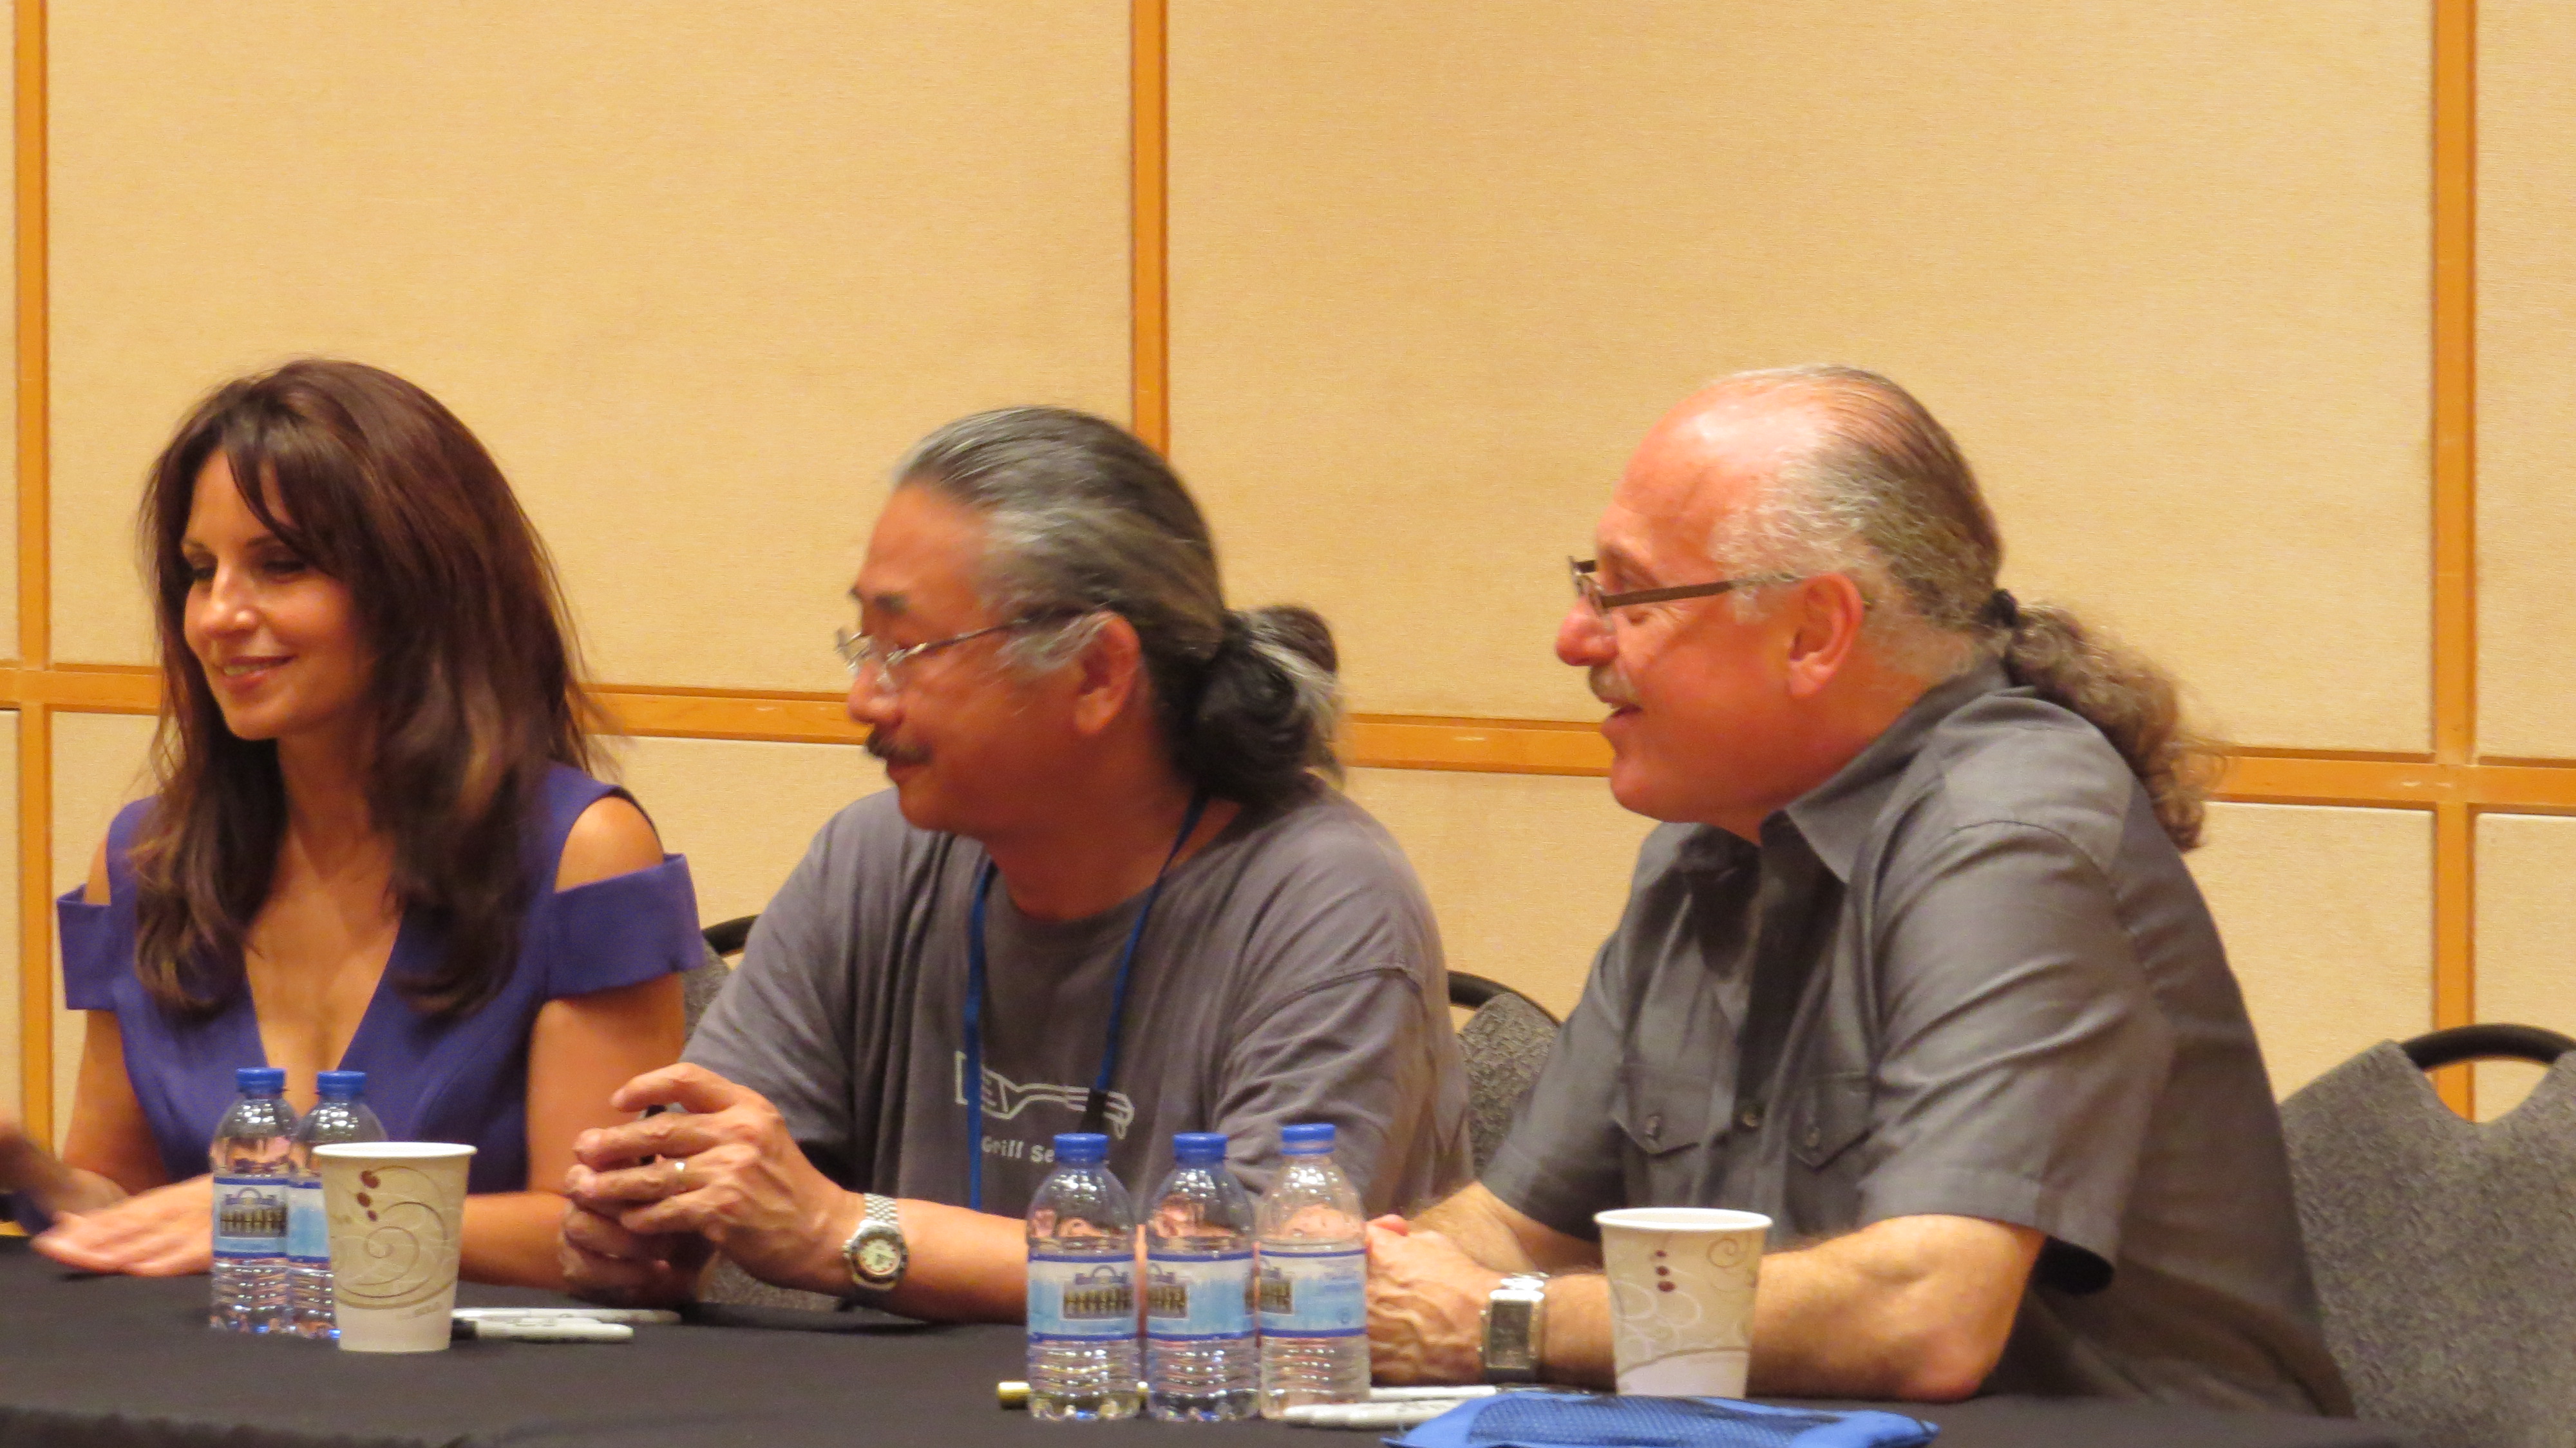 Nobuo Uematsu, Arnie Roth and Susan Calloway Signing for Fans Panel for Fans